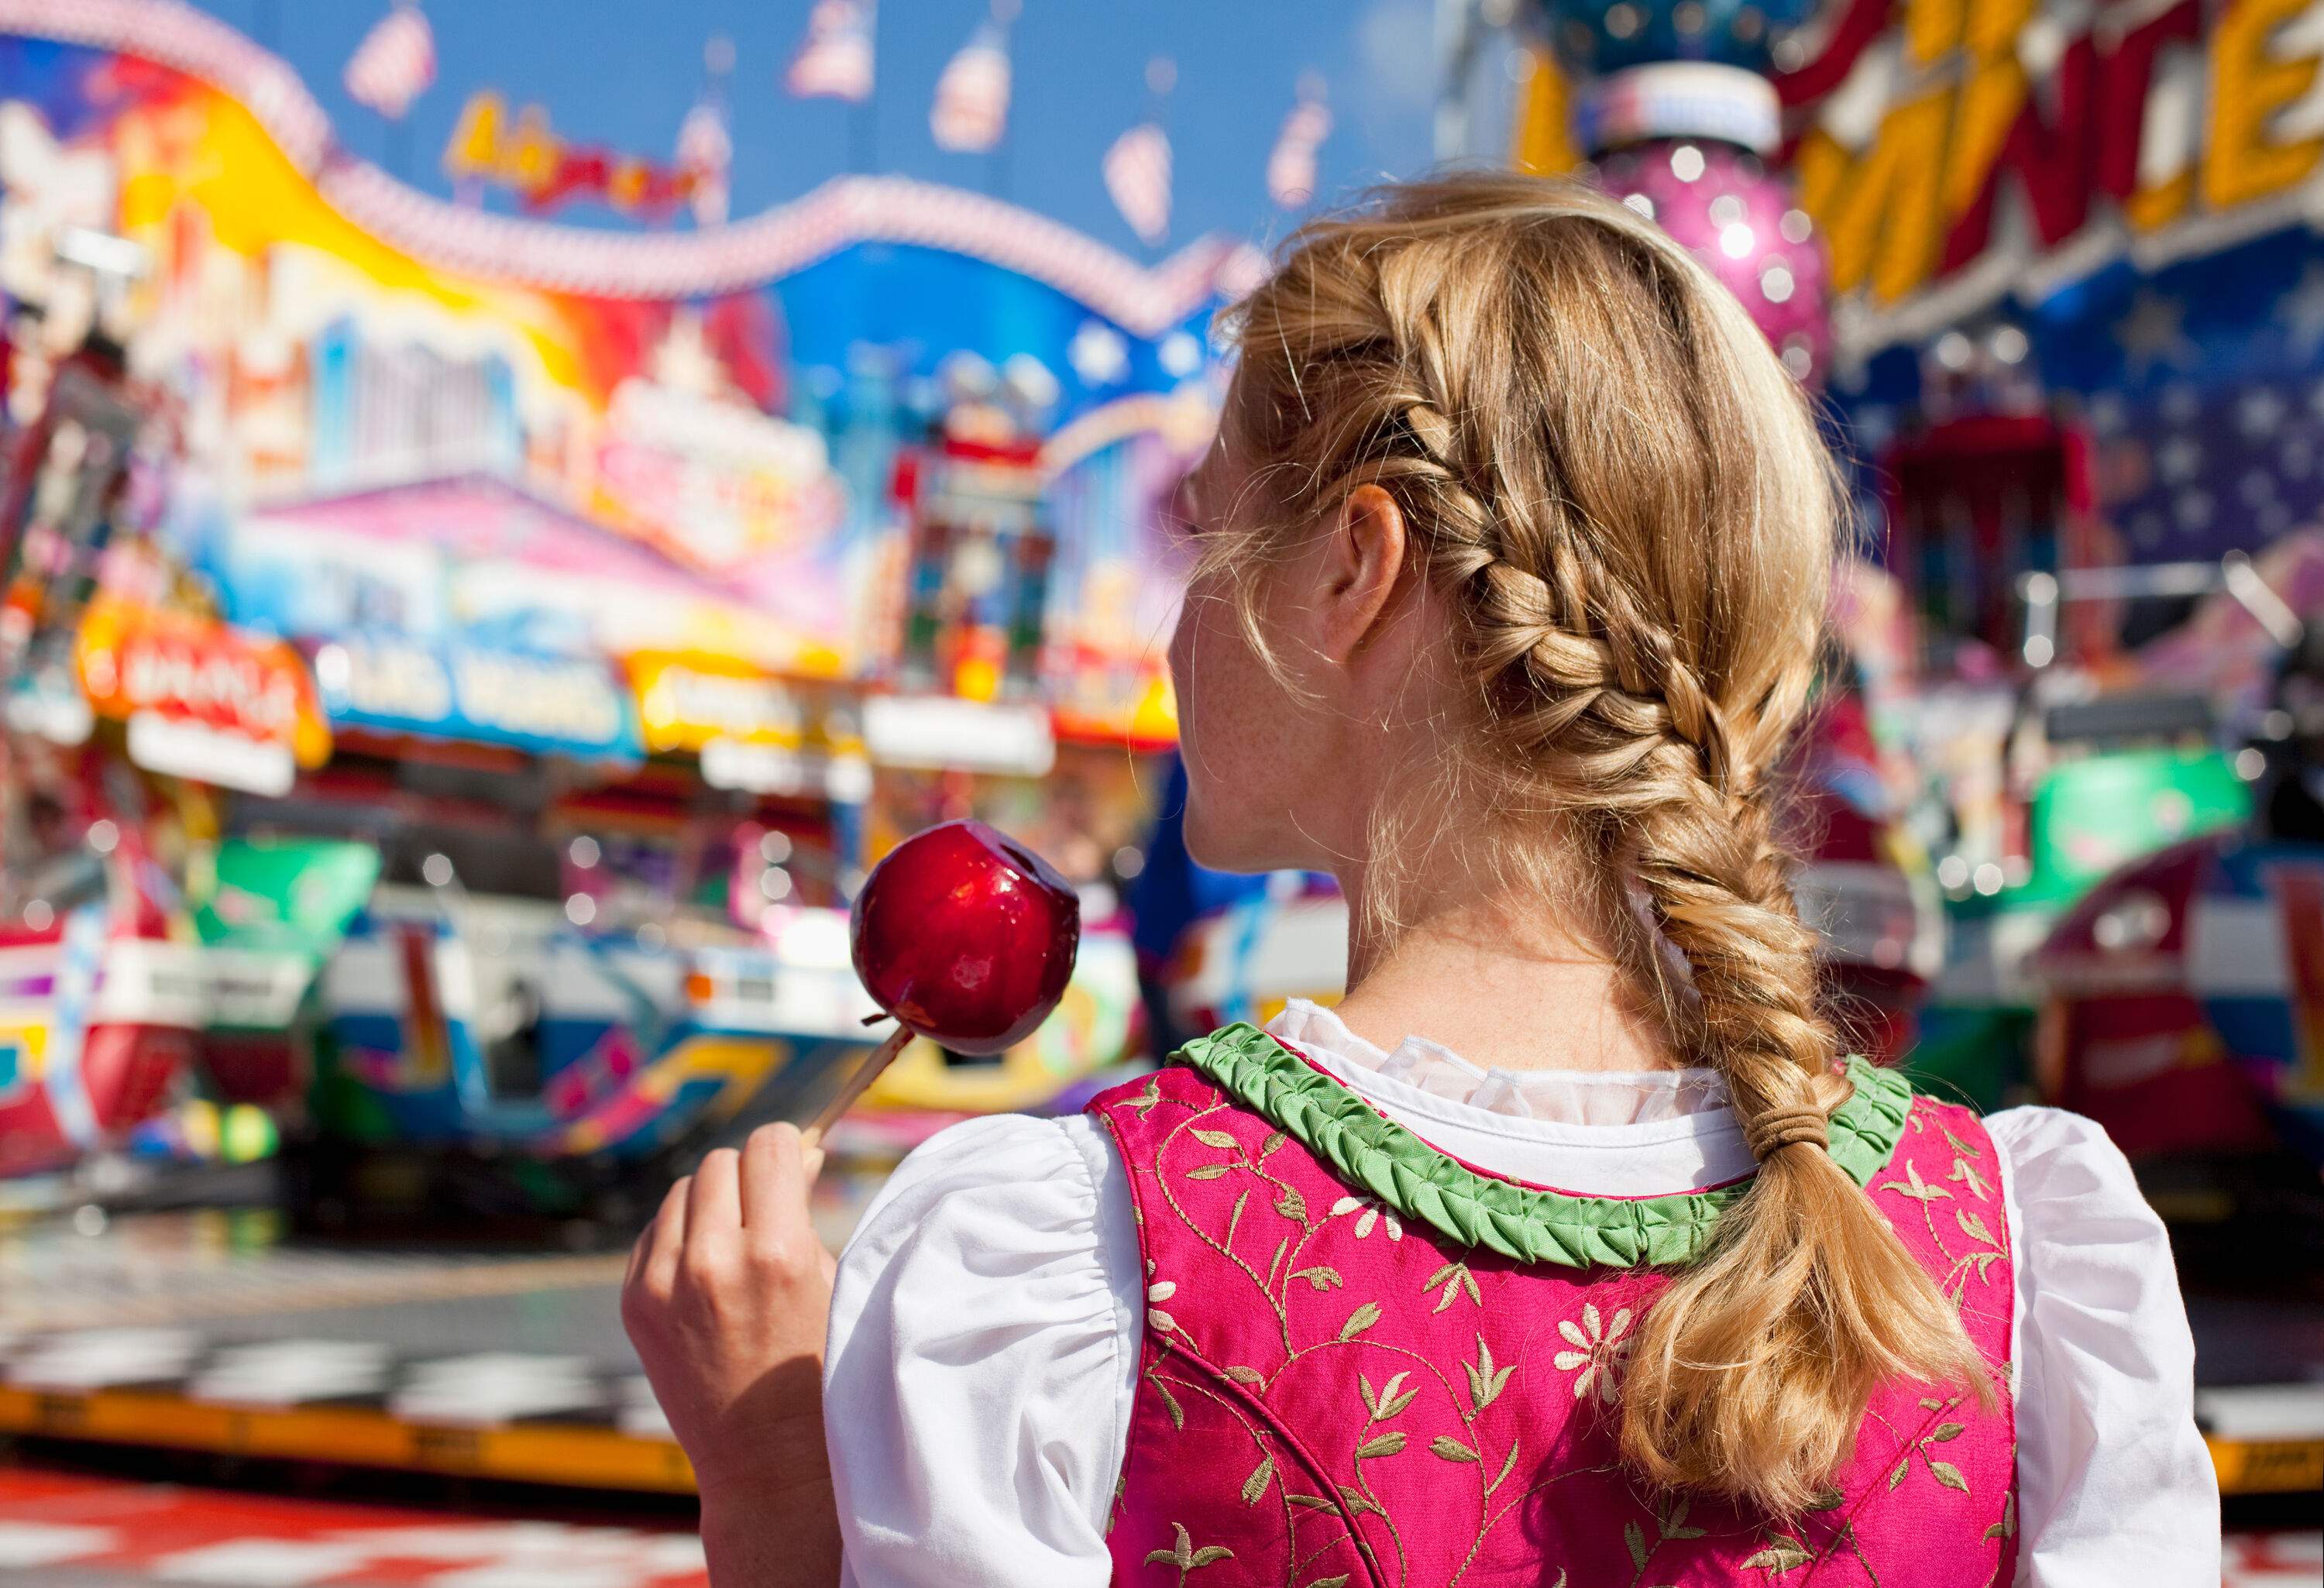 A blonde girl with braided hair holding a sugar-coated apple in a stick.